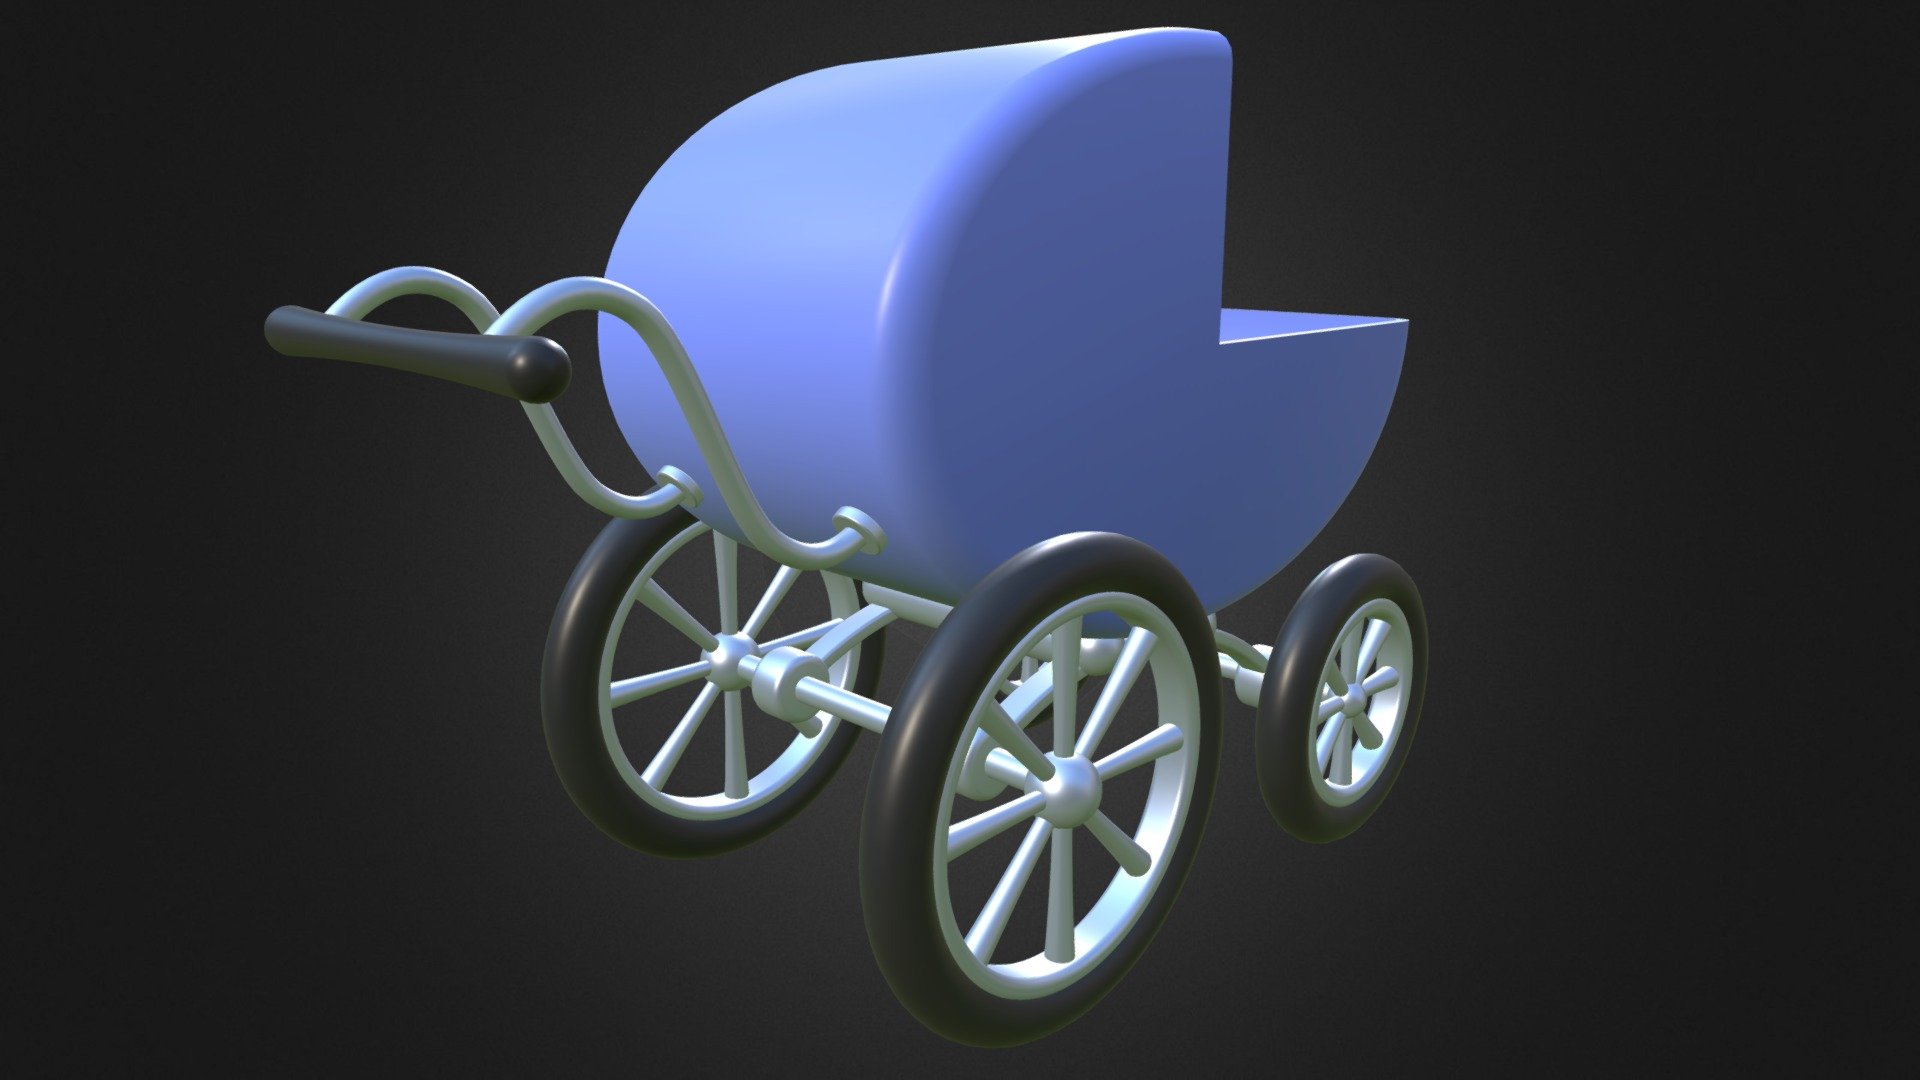 Cartoony 3D model of a stroller or perambulator or buggy.  Buy this 3D model here: -link removed-  I'm for hire as a 3D (print) modeler: mail [at] metinseven [dot] com - Stroller or perambulator - 3D model by Metin Seven (@metinseven) 3d model